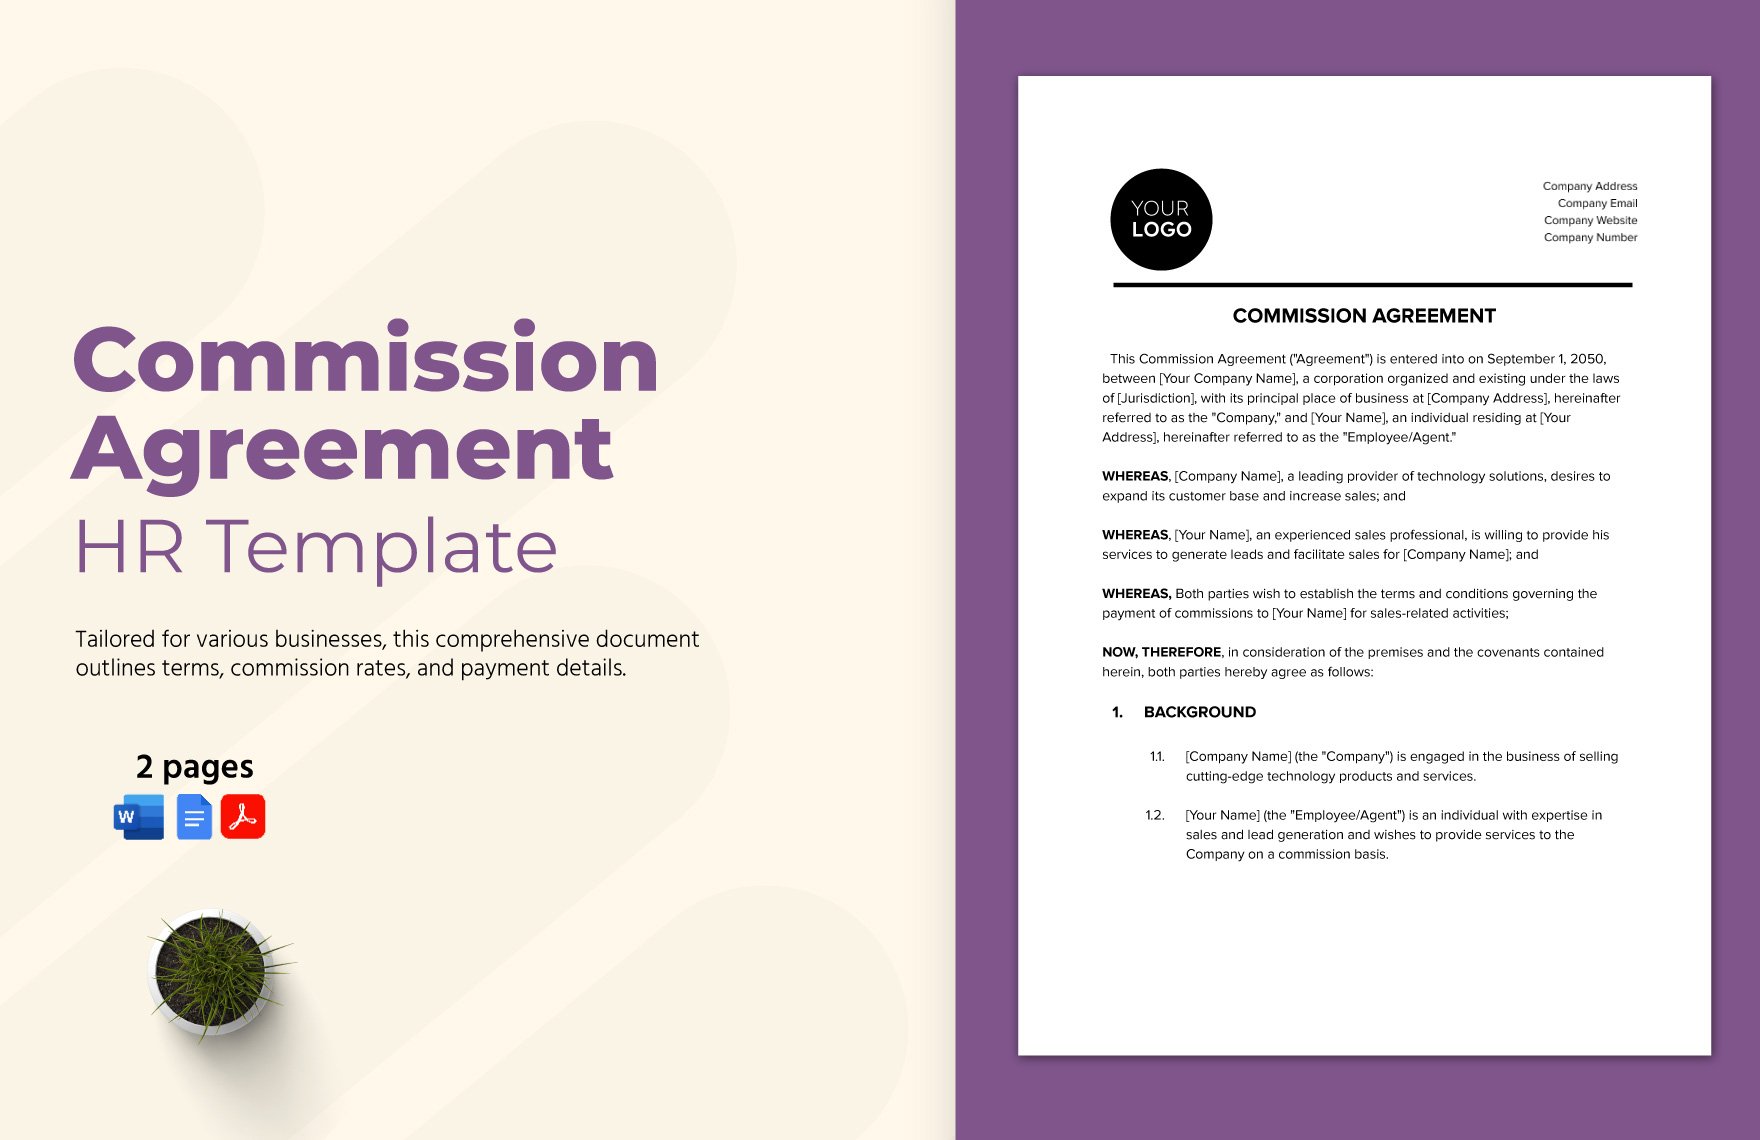 Commission Agreement HR Template in Word, Google Docs, PDF